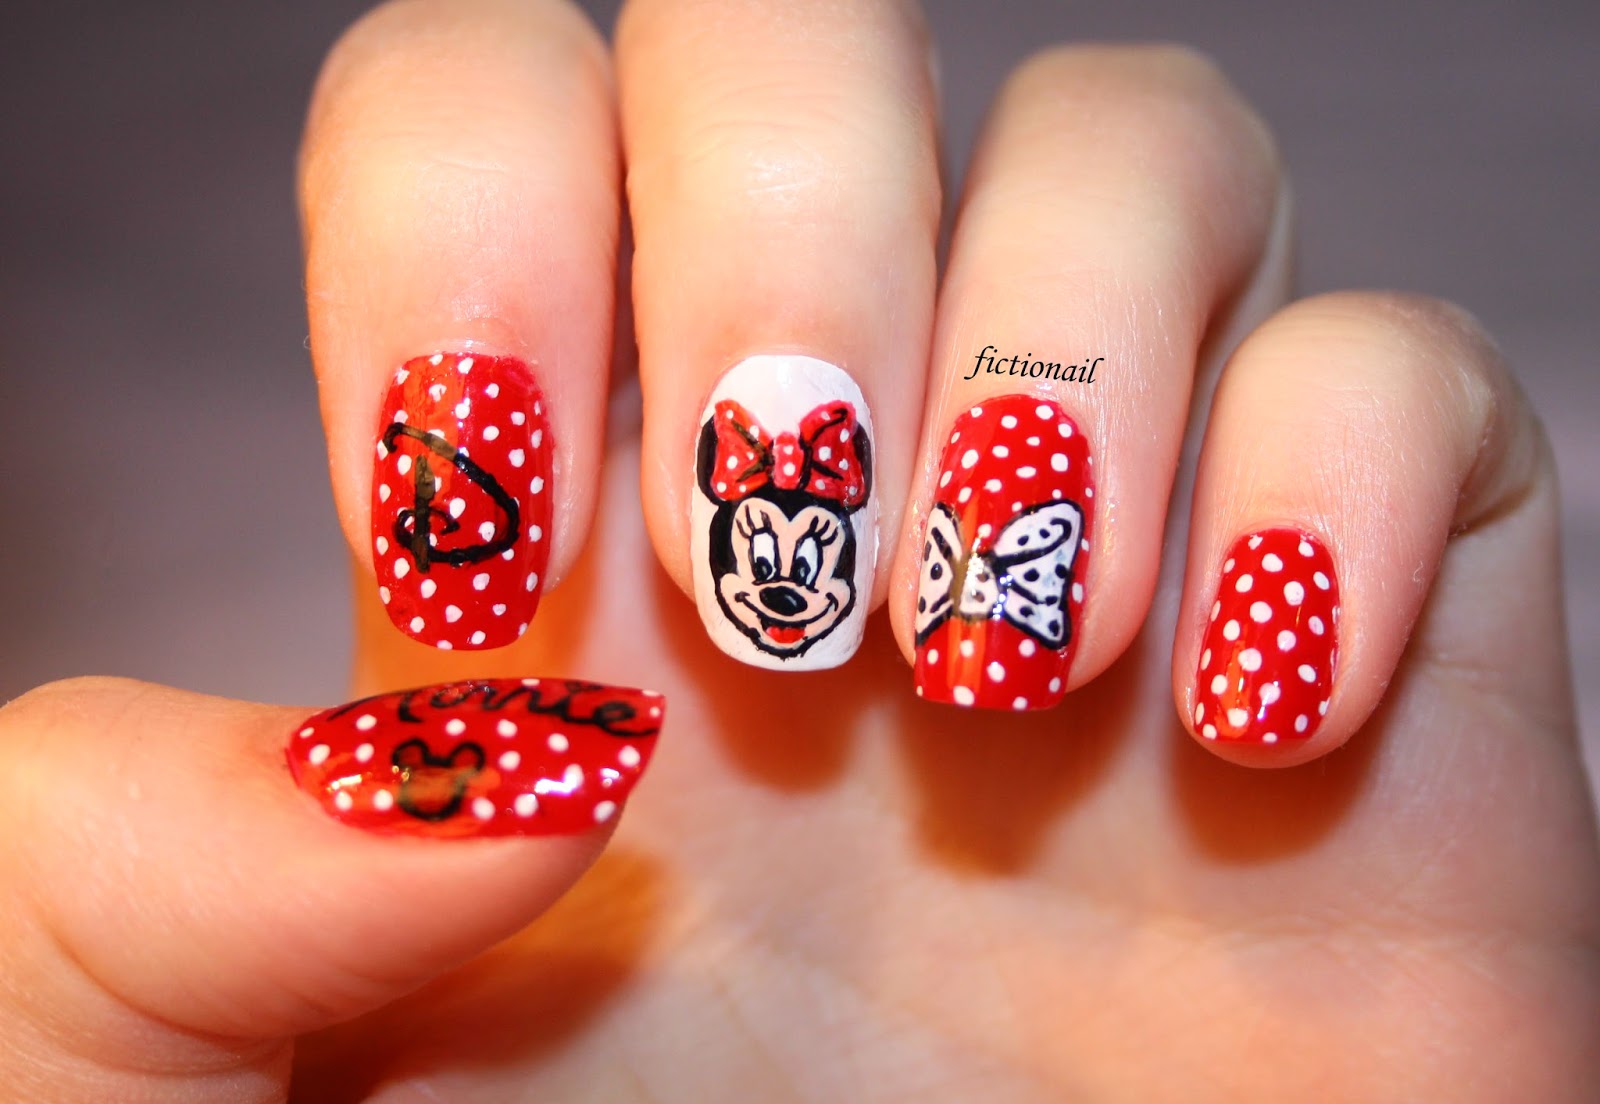 1. Minnie Mouse Nail Art Tutorial for Short Nails - wide 3